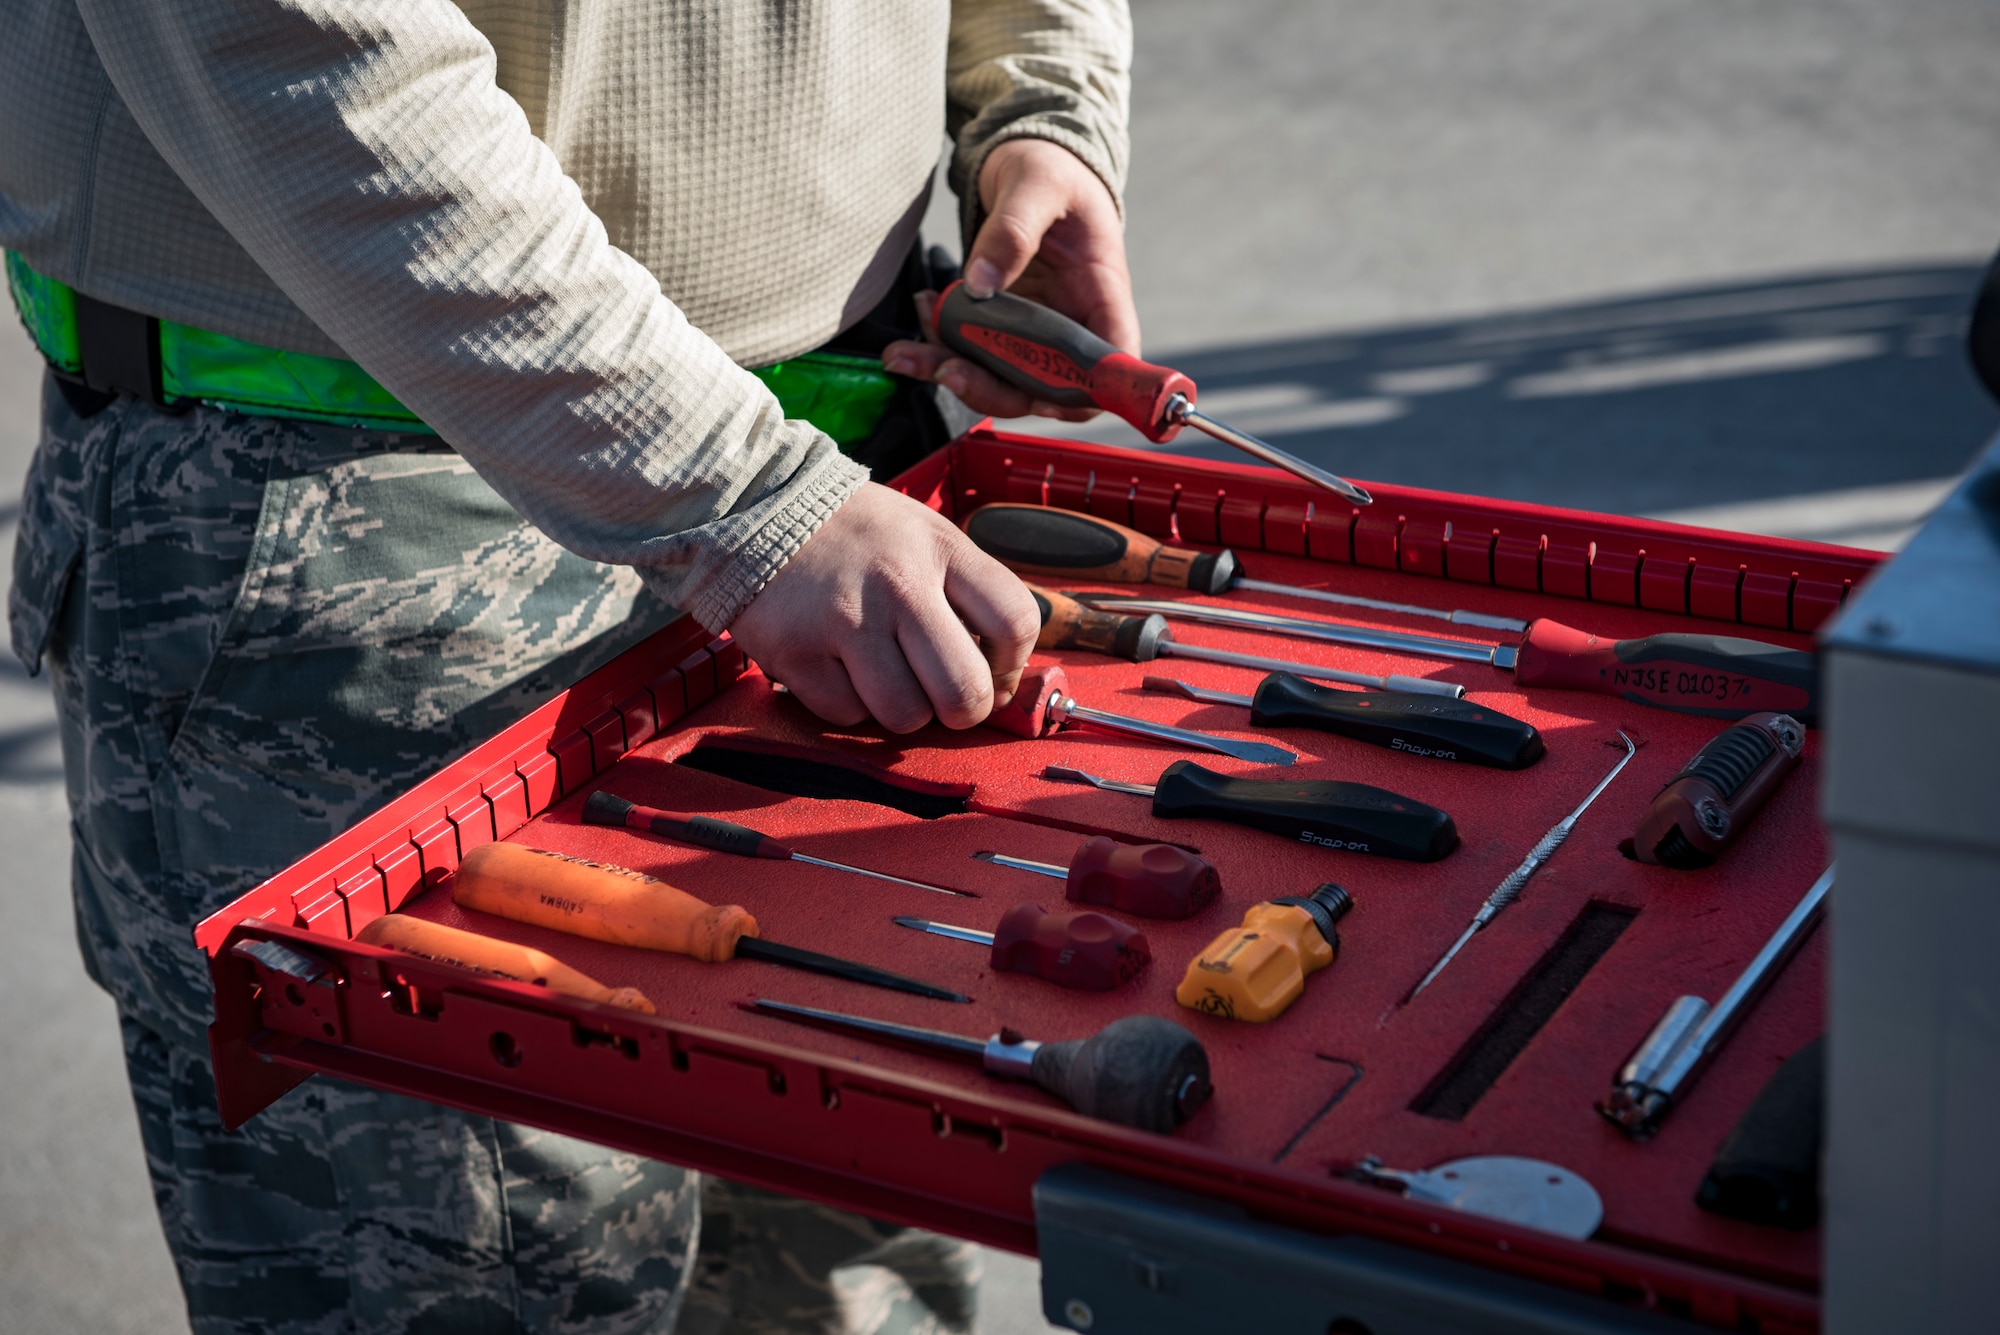 Senior Airman Austin Reynolds, 57th Aircraft Maintenance Squadron weapons loader, picks up a screwdriver during a load crew competition at Nellis Air Force Base, Nevada, April 13, 2018. The crews inspected, loaded, and secured two Mark 84 bombs and one AIM-120 AMRAAM onto their respective aircraft.(U.S. Air Force photo by Airman 1st Class Andrew D. Sarver)